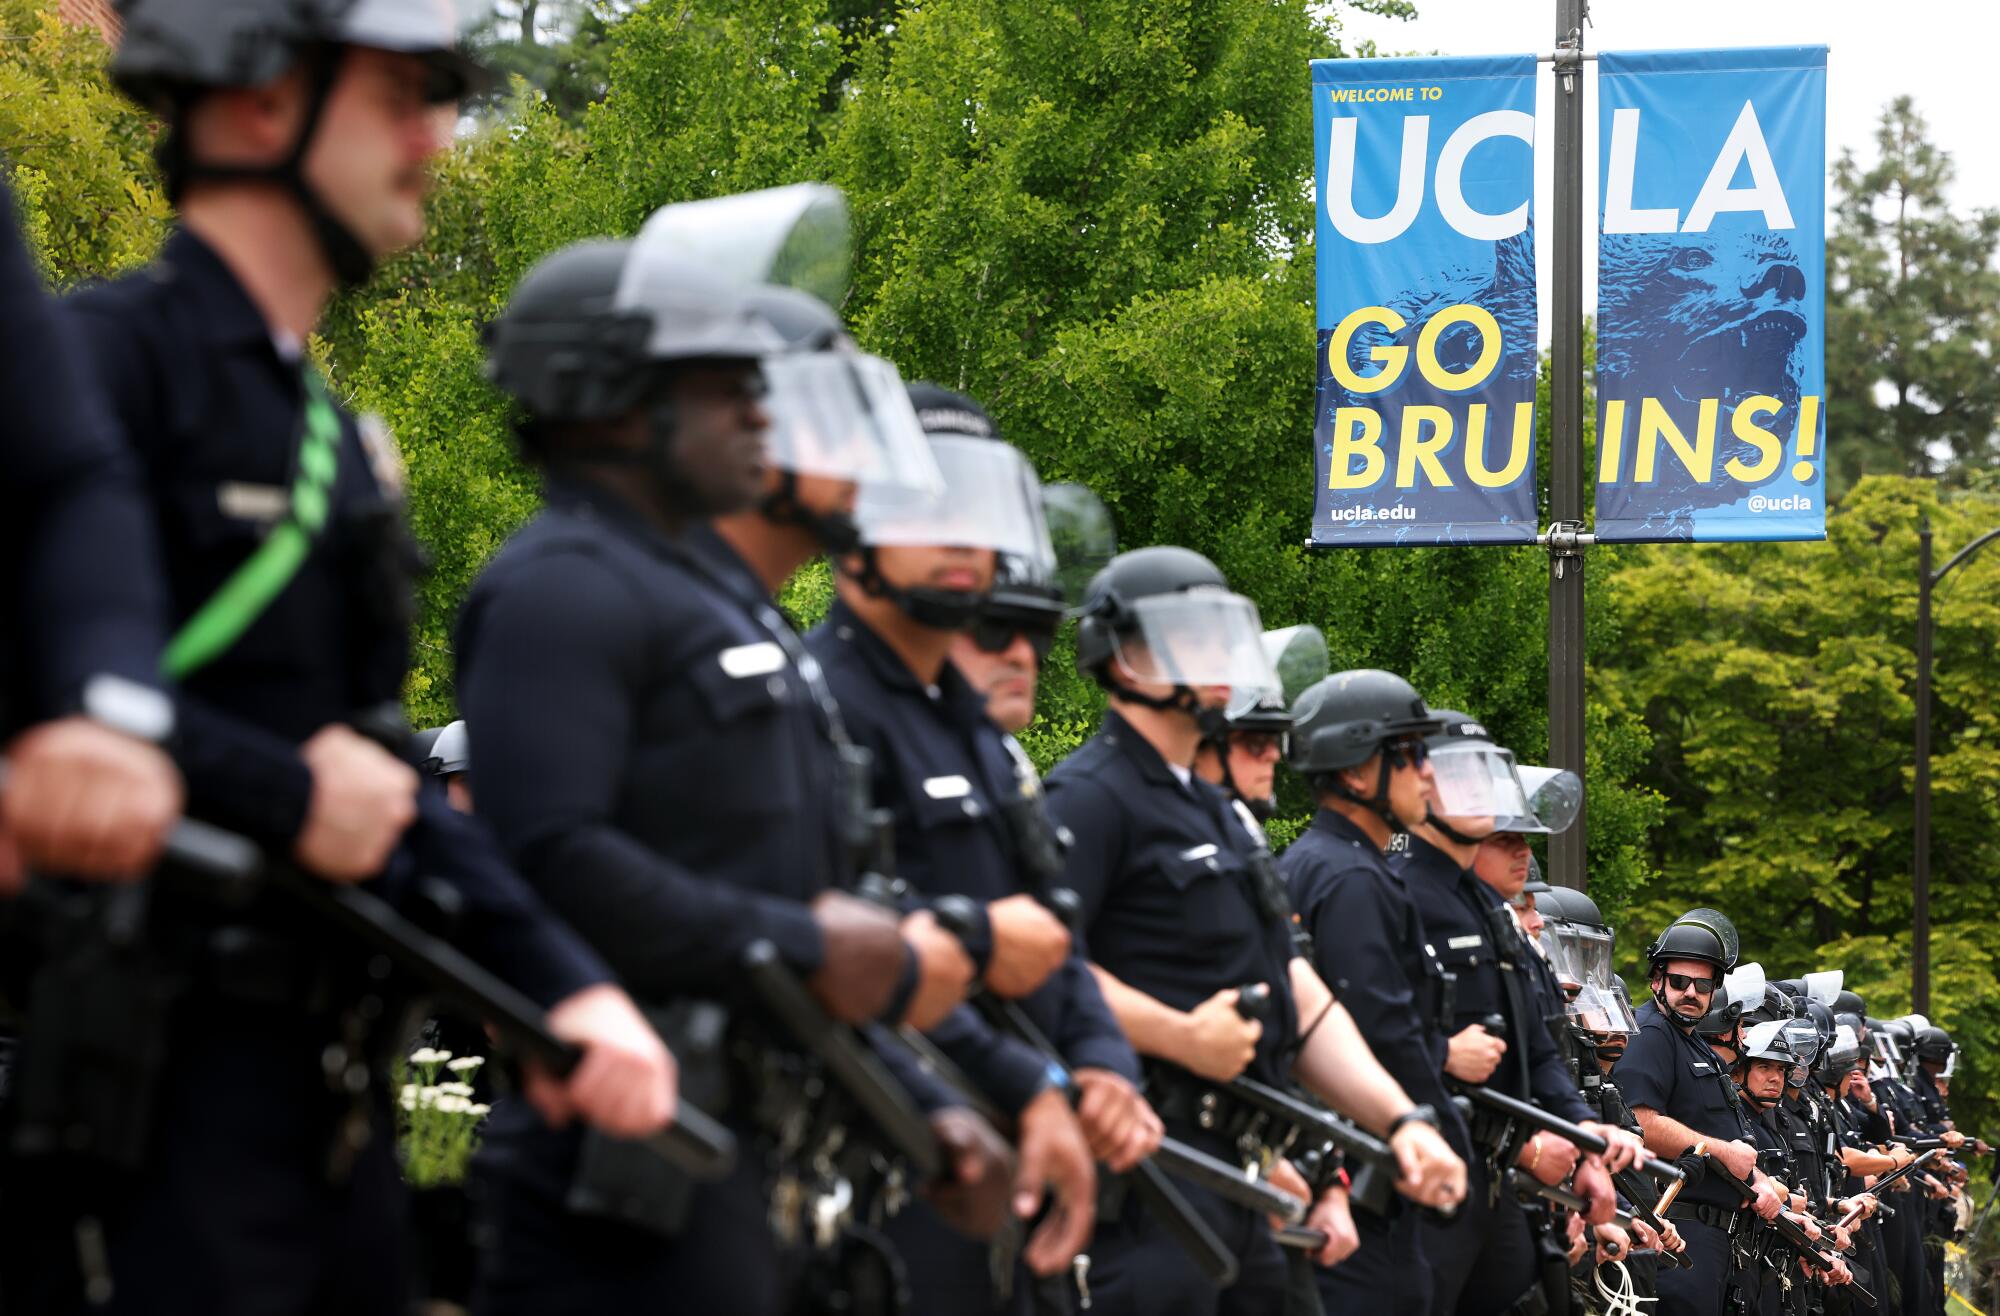 Officers in helmets and holding batons stand in a line near a sign that says "UCLA, Go Bruins!"